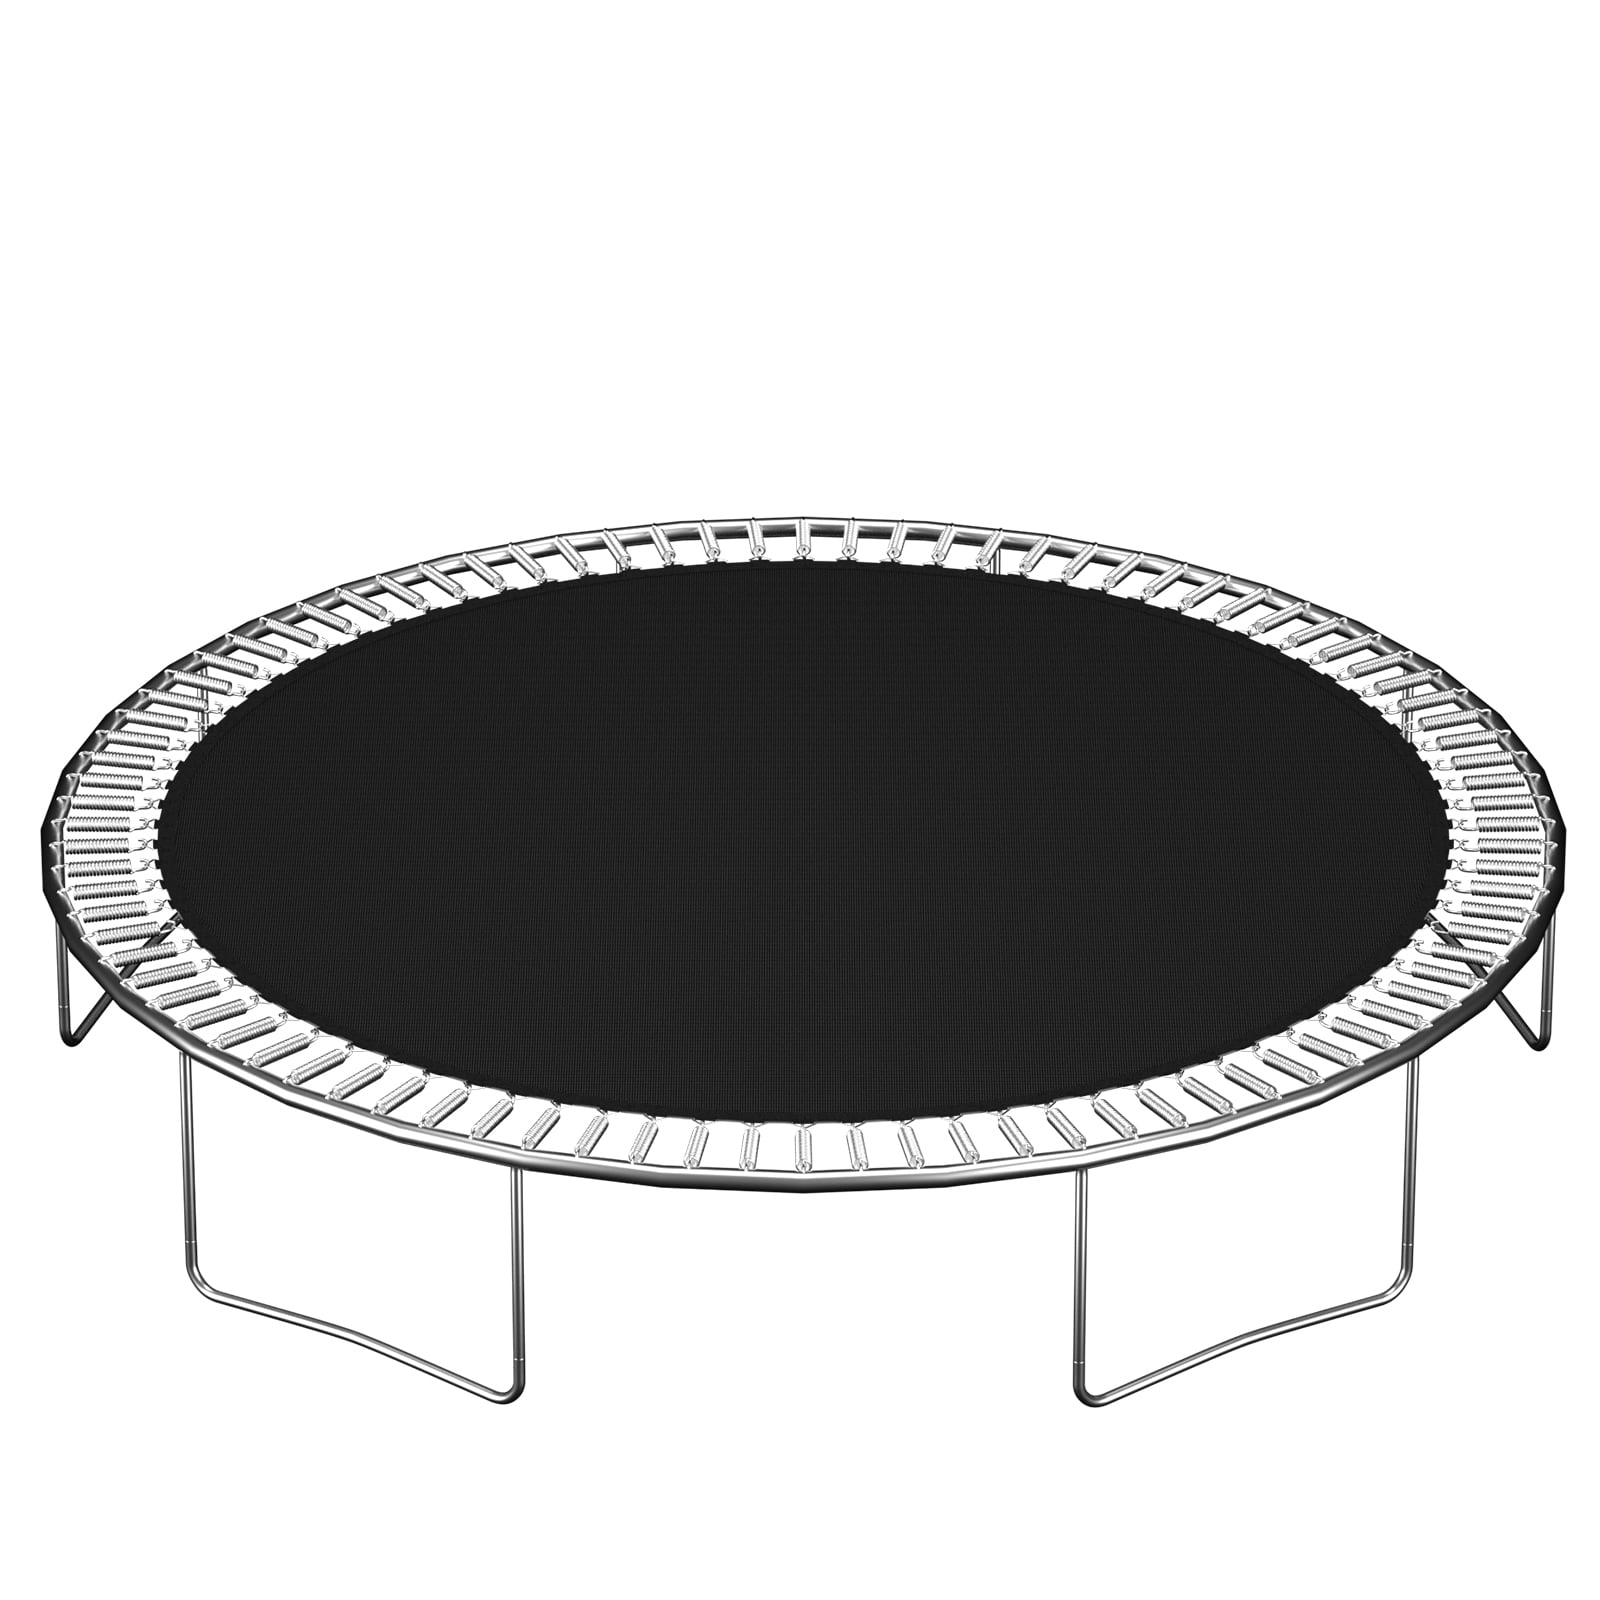 Replacement Jumping Mat Fits 14 ft Round Trampoline Frame with 72 v-rings 